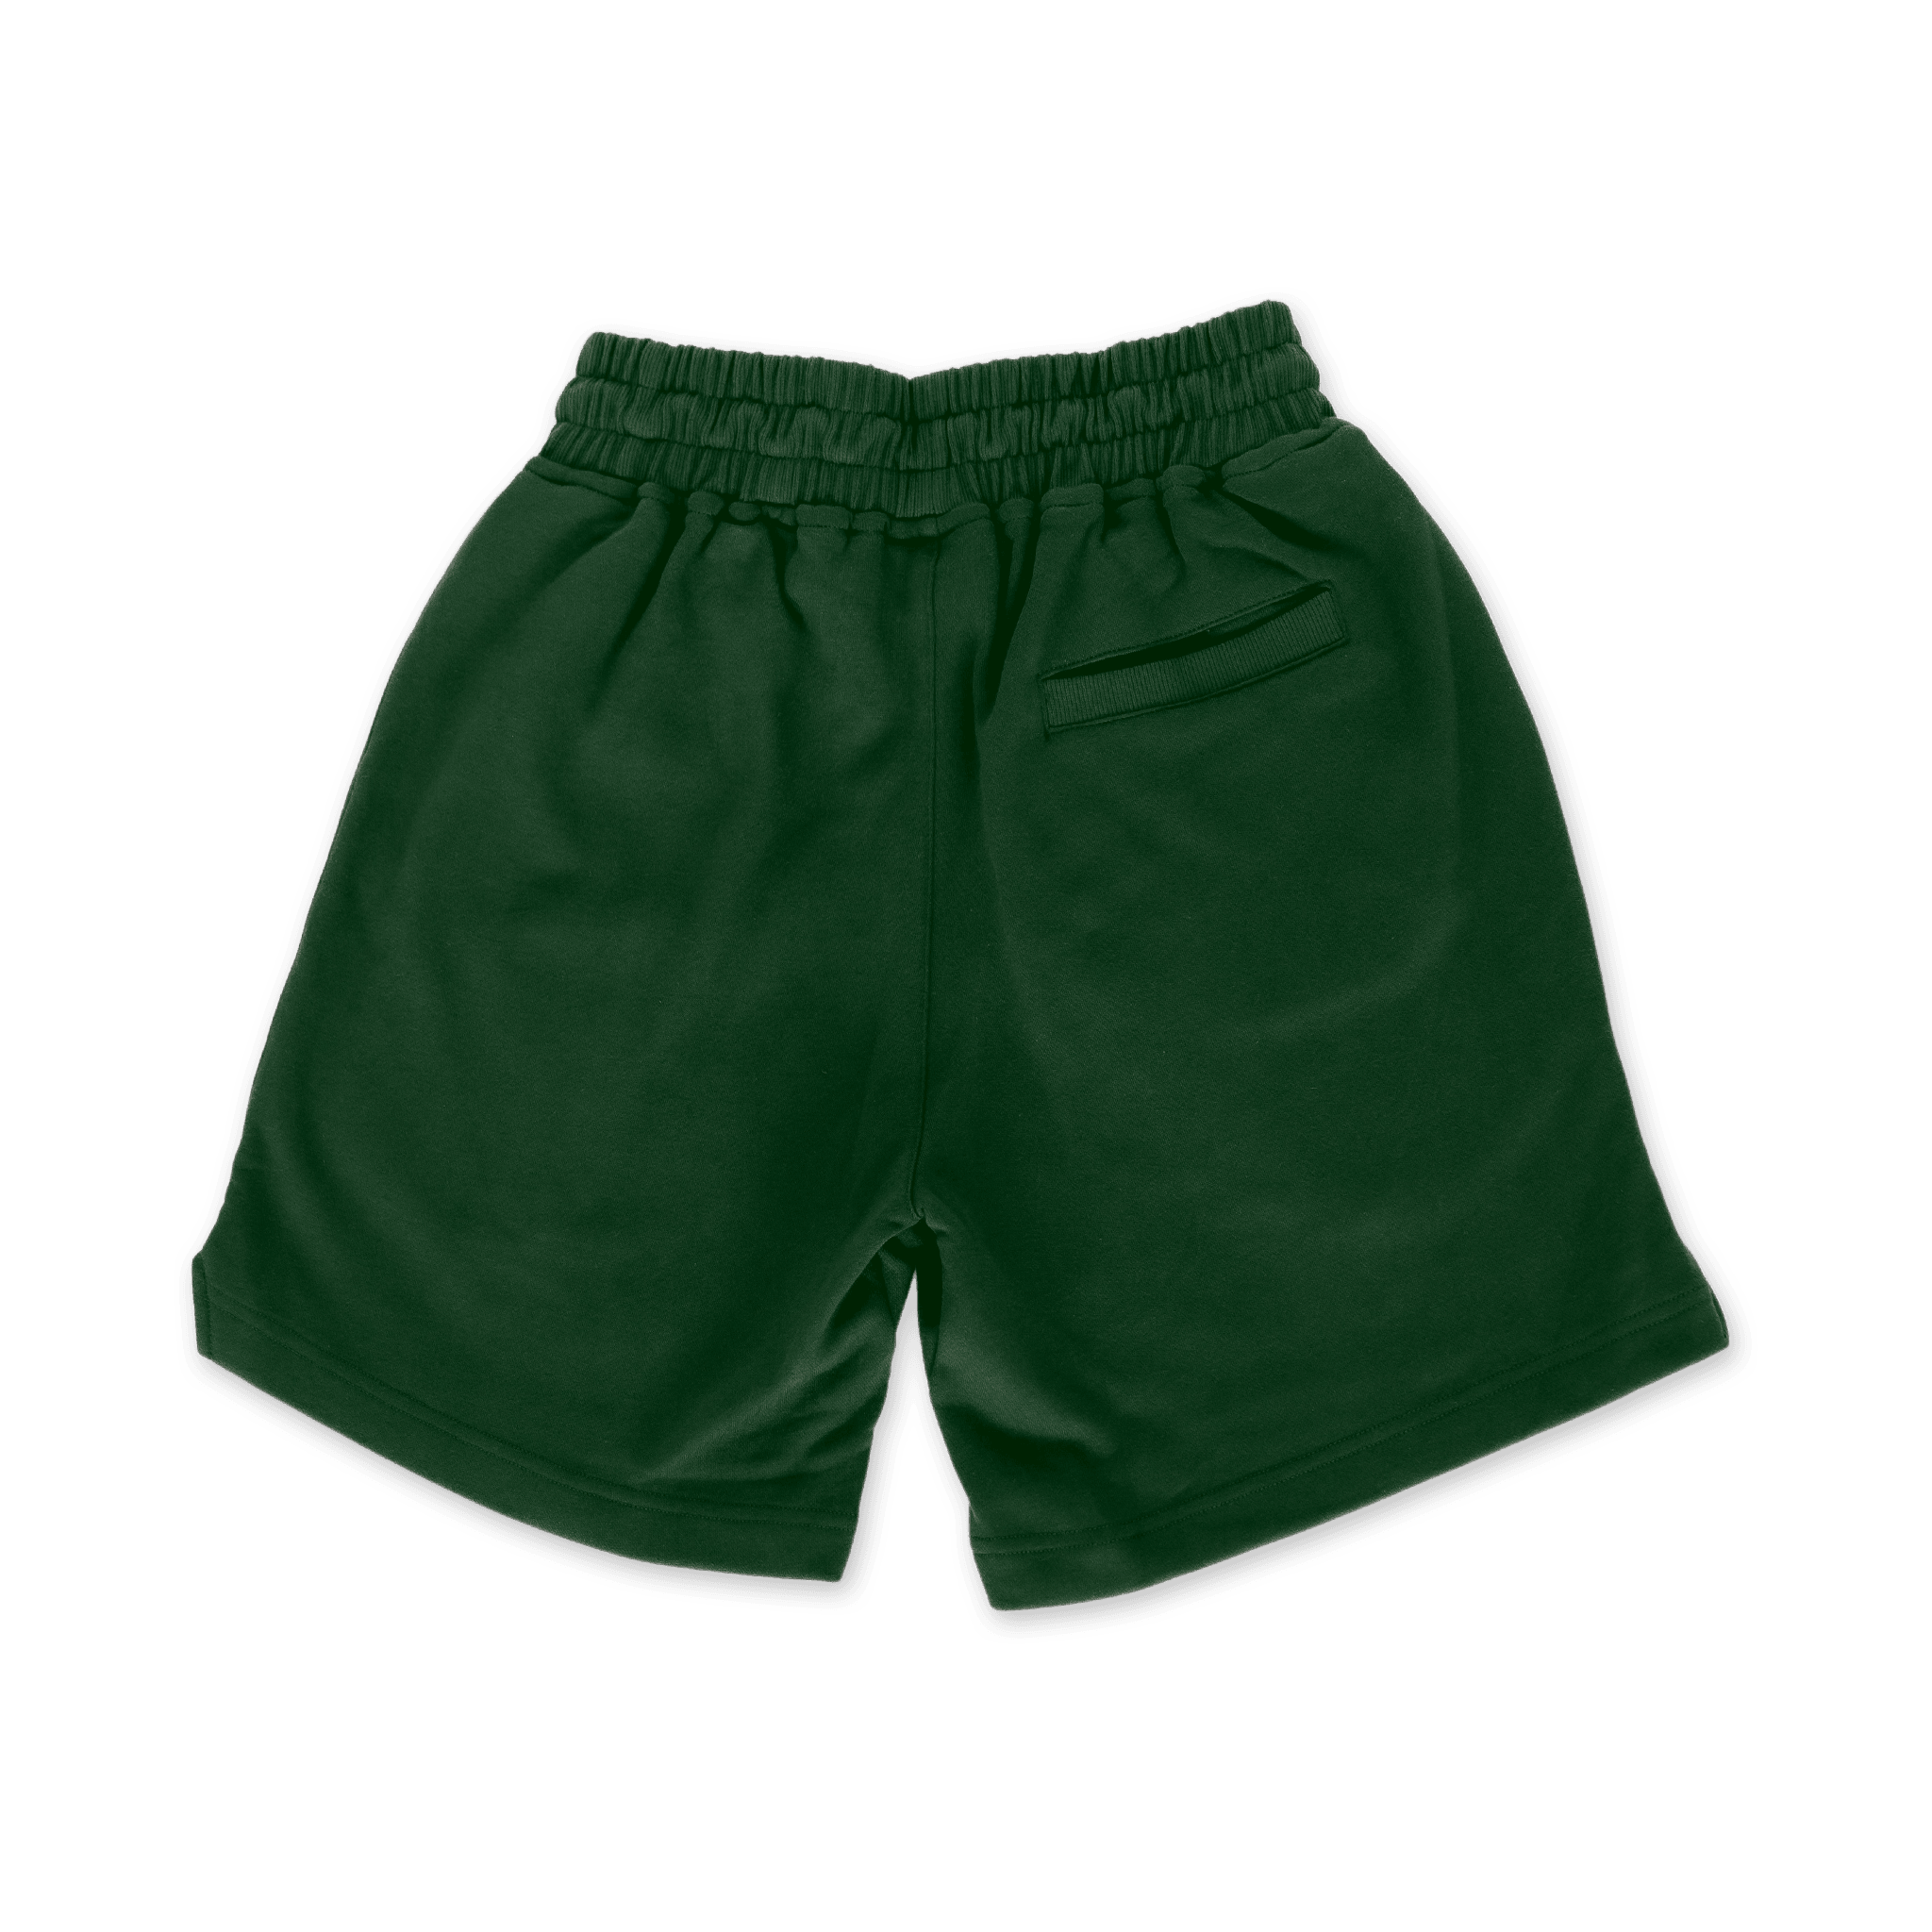 Dark Green Glyph Shorts - All@Once